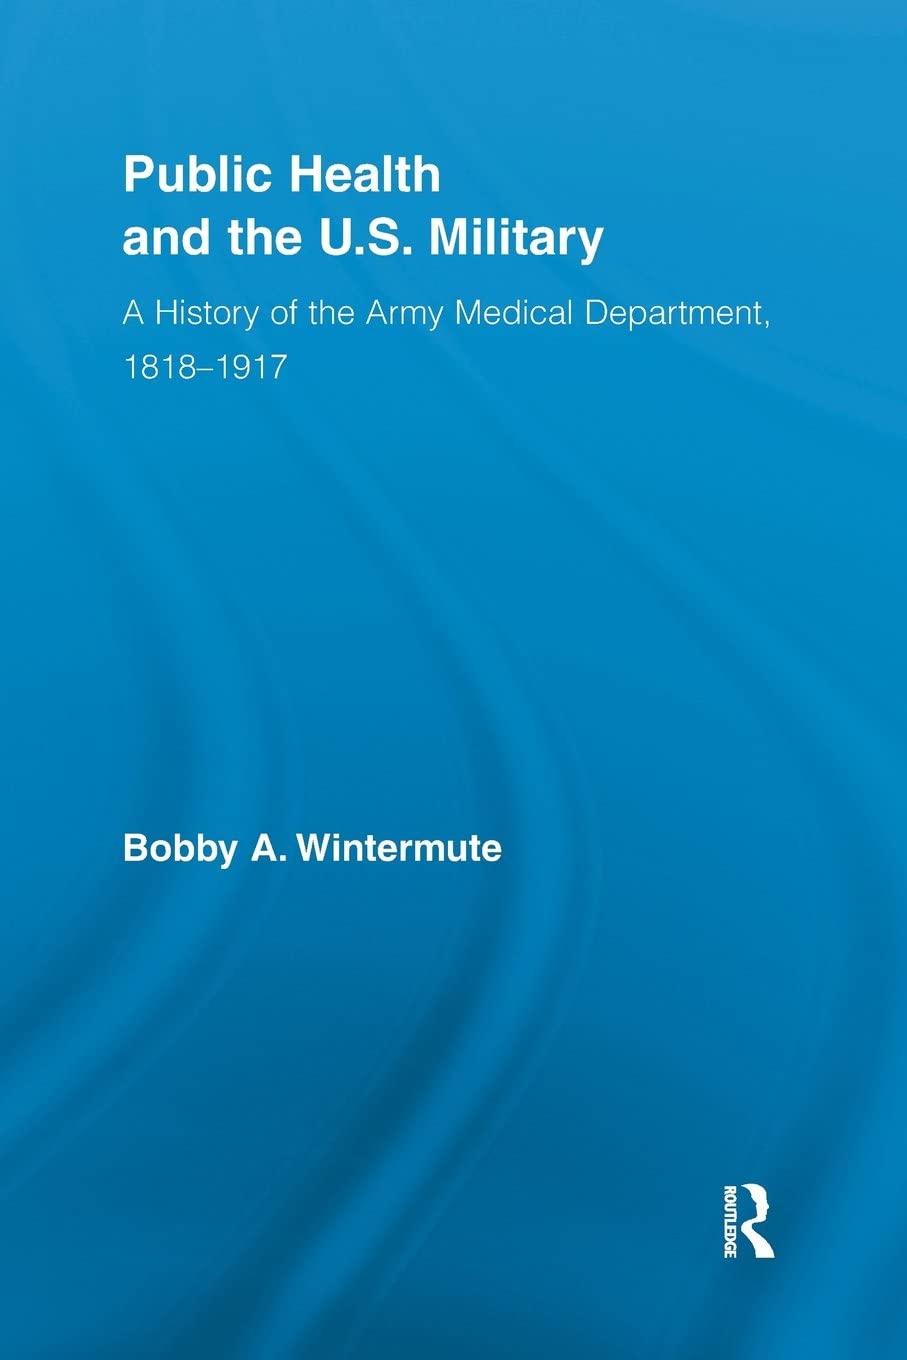 Public Health and the US Military (Routledge Advances in American History)